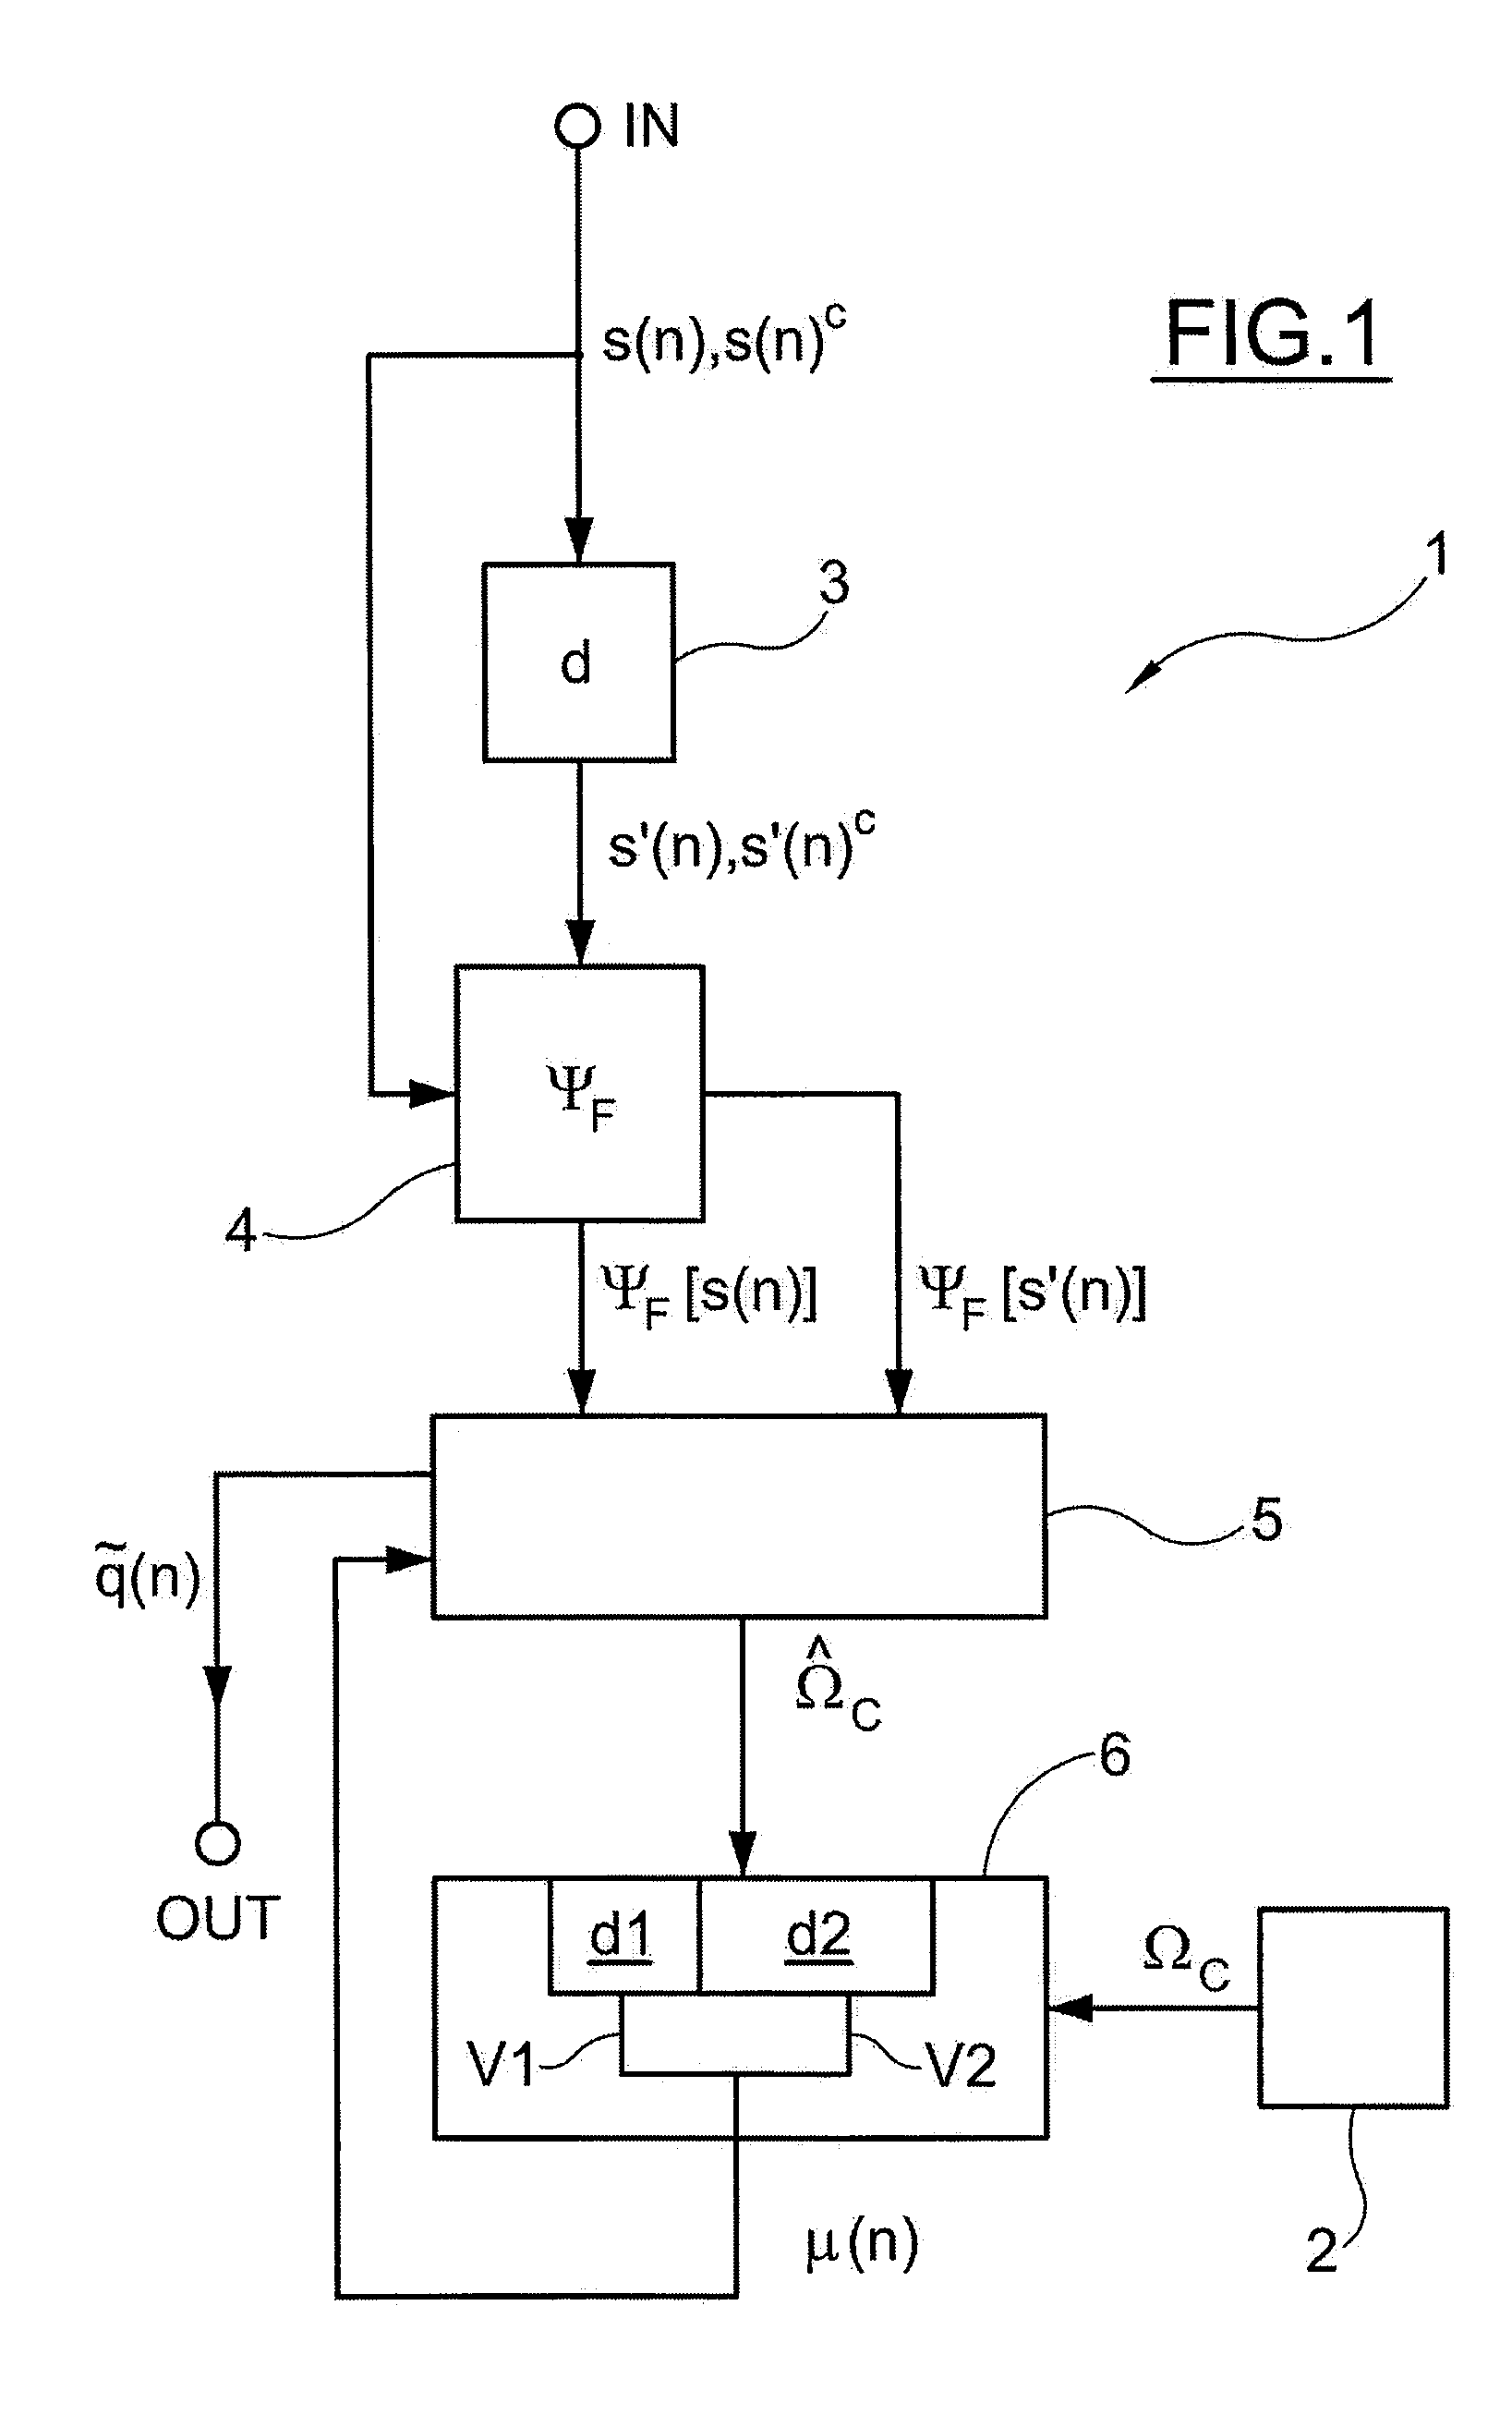 Method and apparatus for suppressing adjacent channel interference and multipath propagation signals and radio receiver using said apparatus